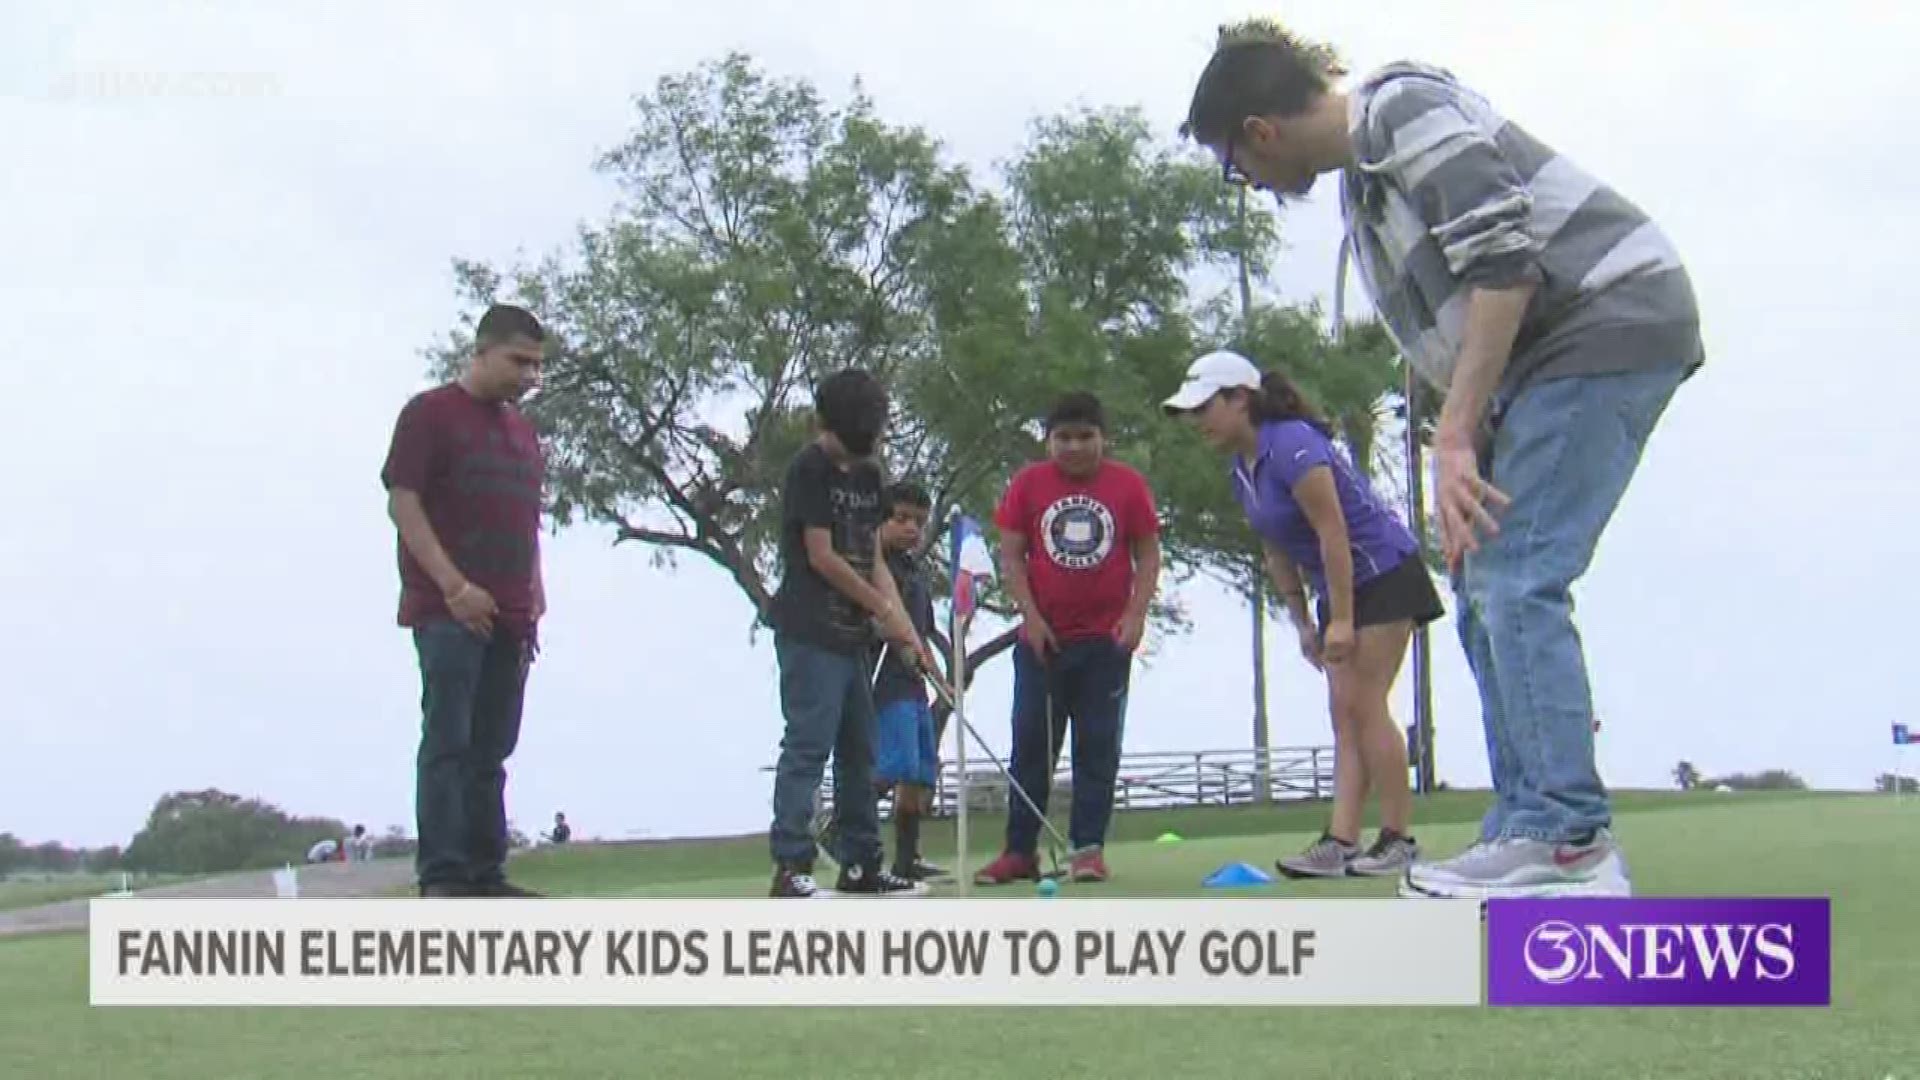 Some students at Moody High School spent their free time volunteering Tuesday to show elementary school students how to play golf.